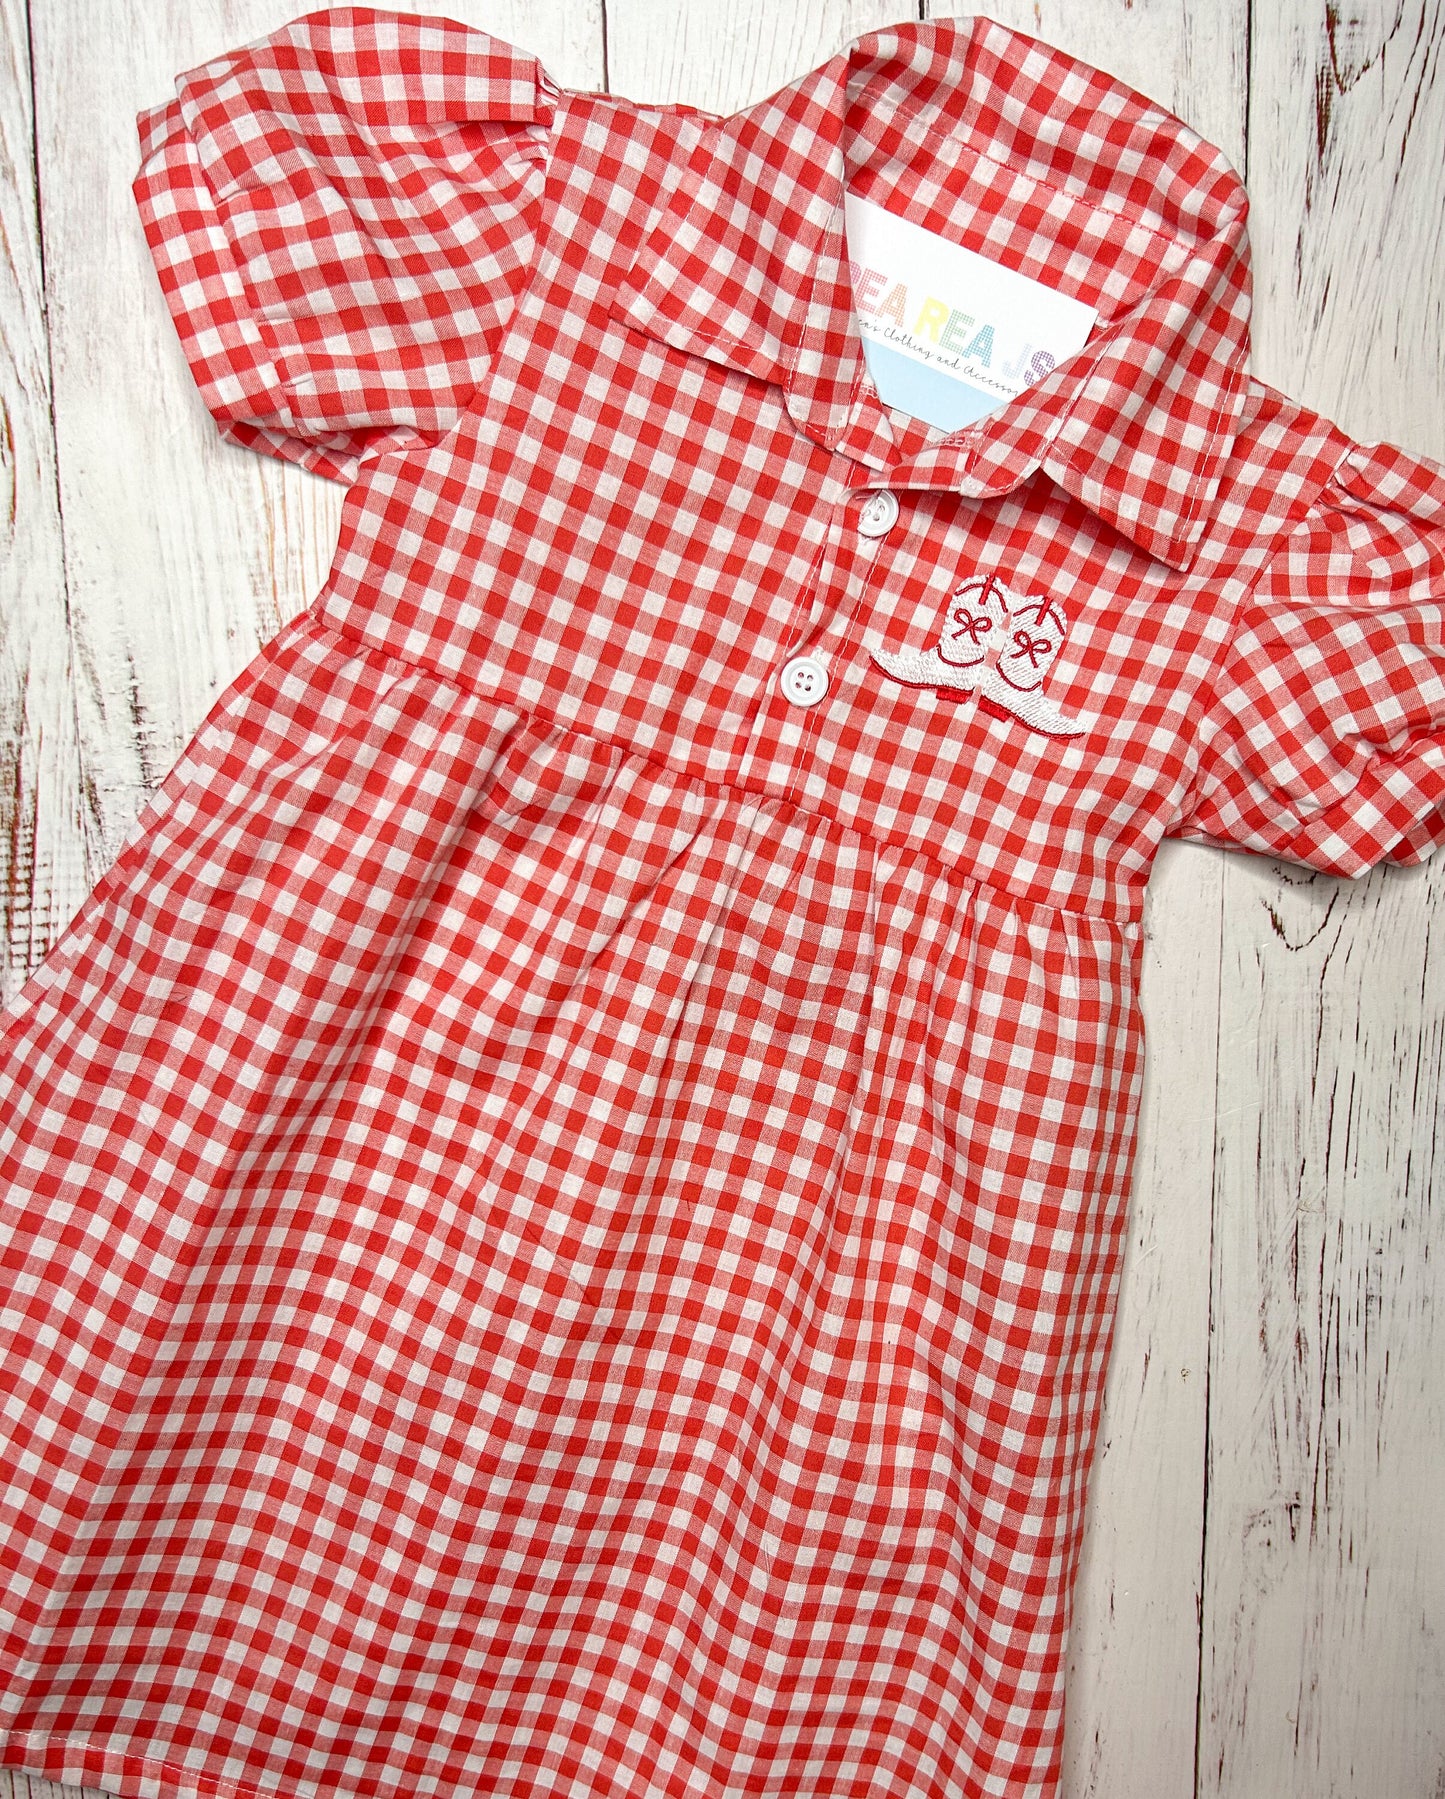 Rodeo Boots Gingham Shirt or Dress